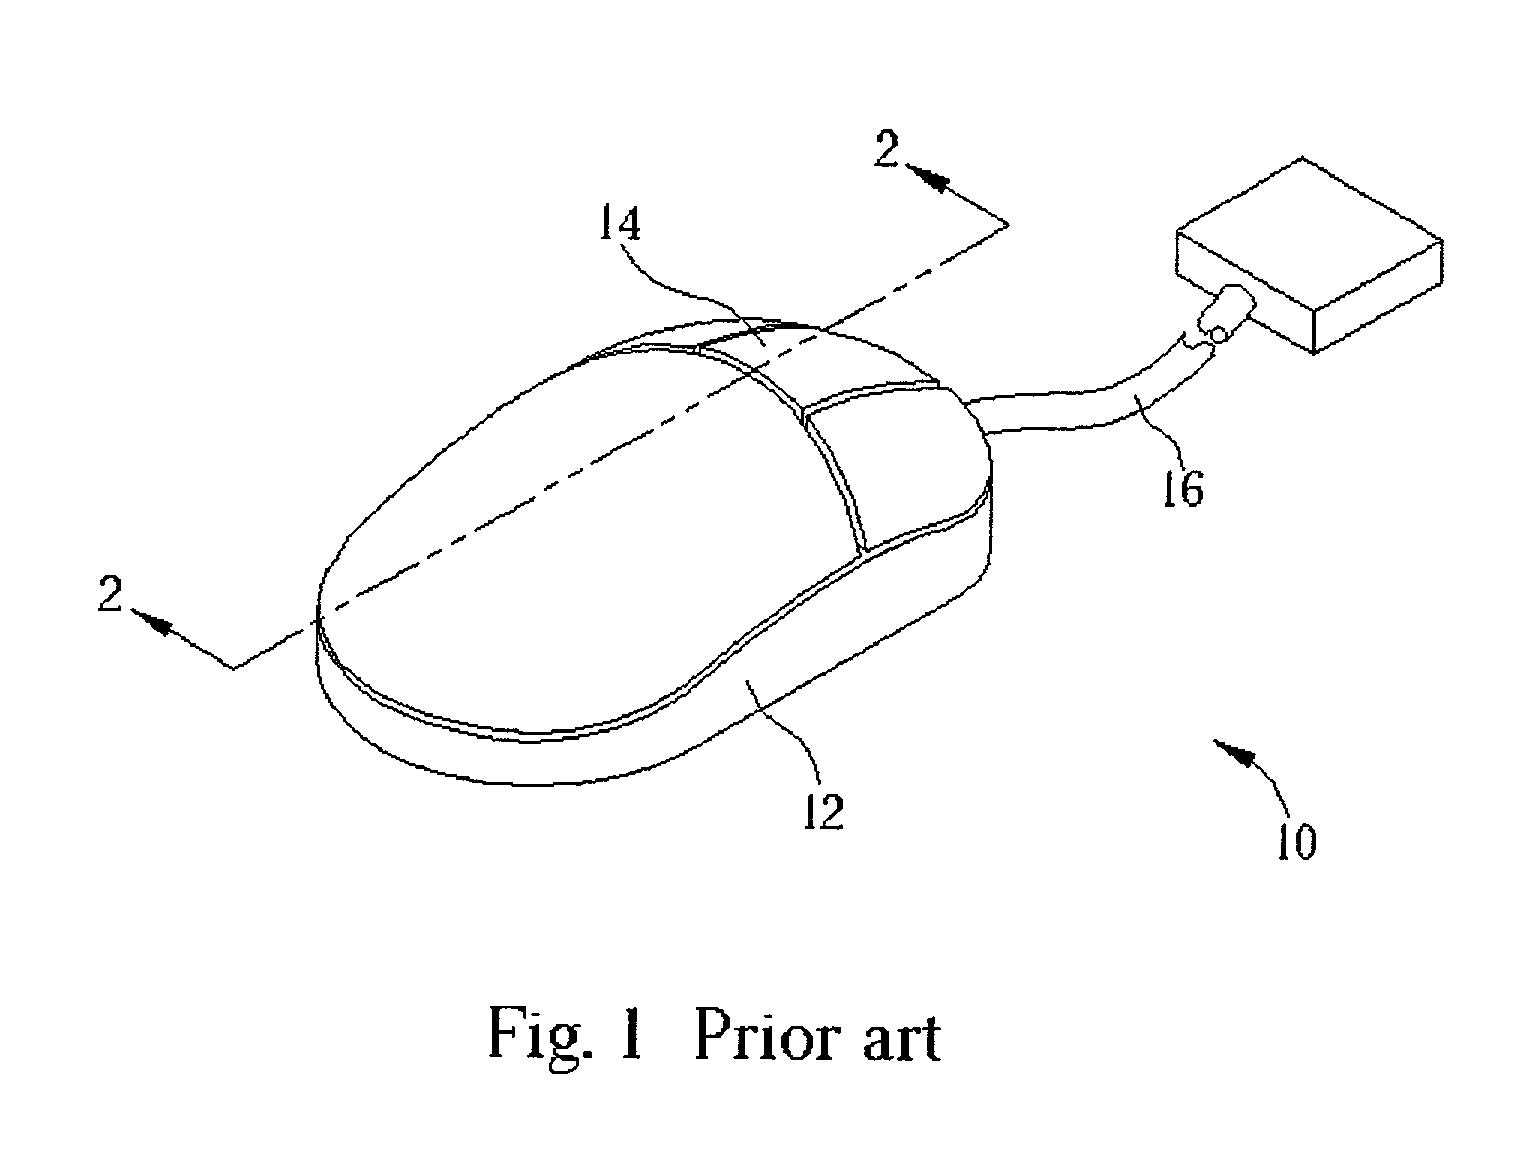 Computer pointing device employing a magnetic field source and magnetic field sensors